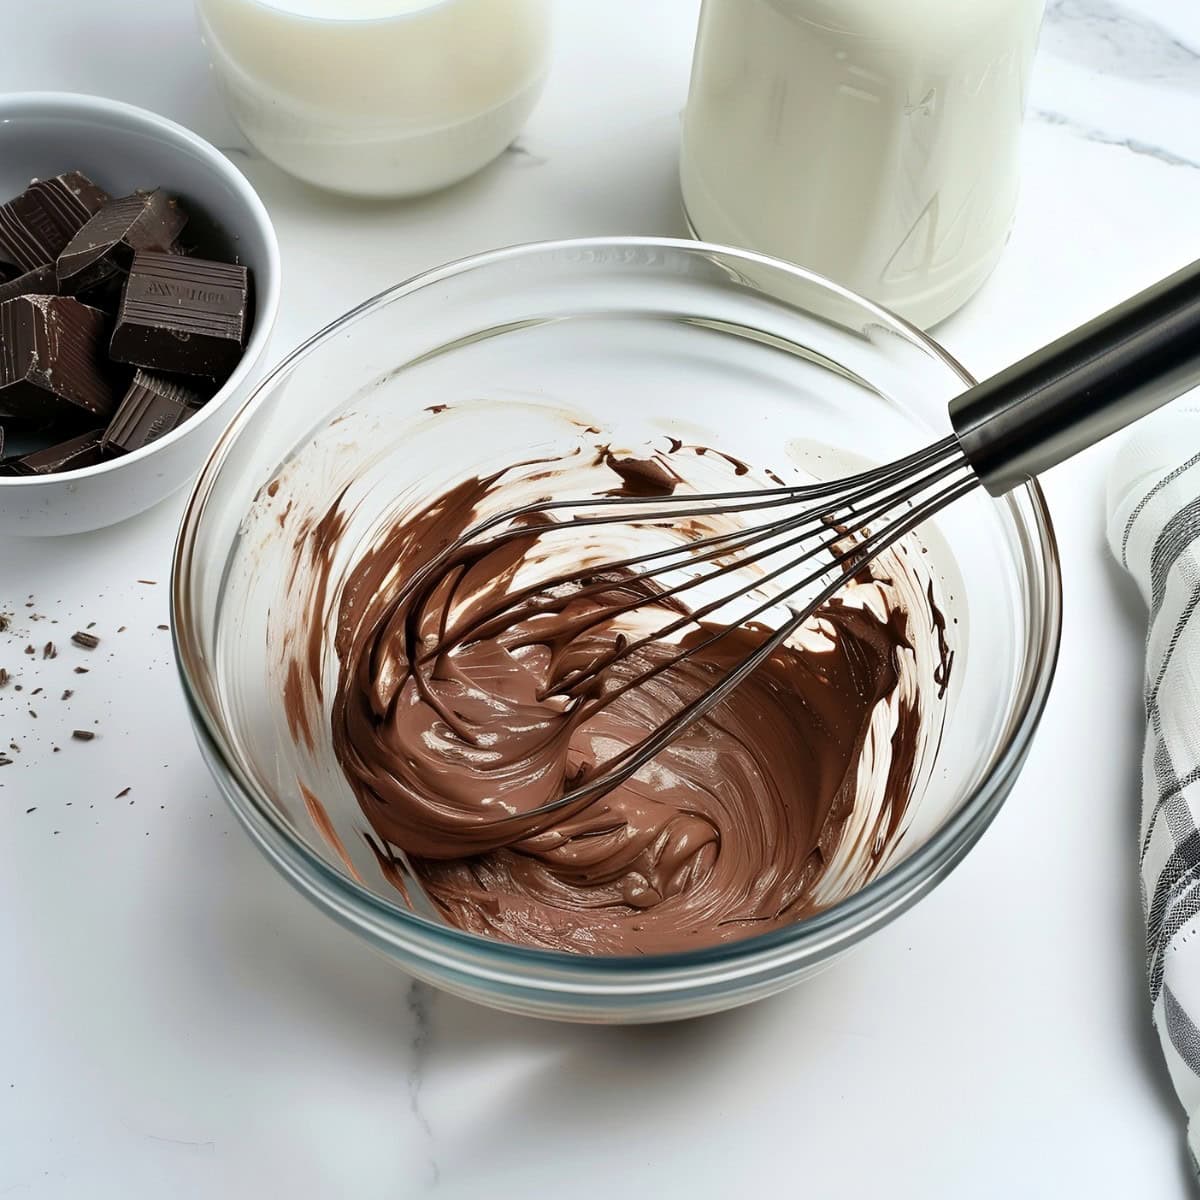 A large gloss bowl of whipped chocolate with milk on the side